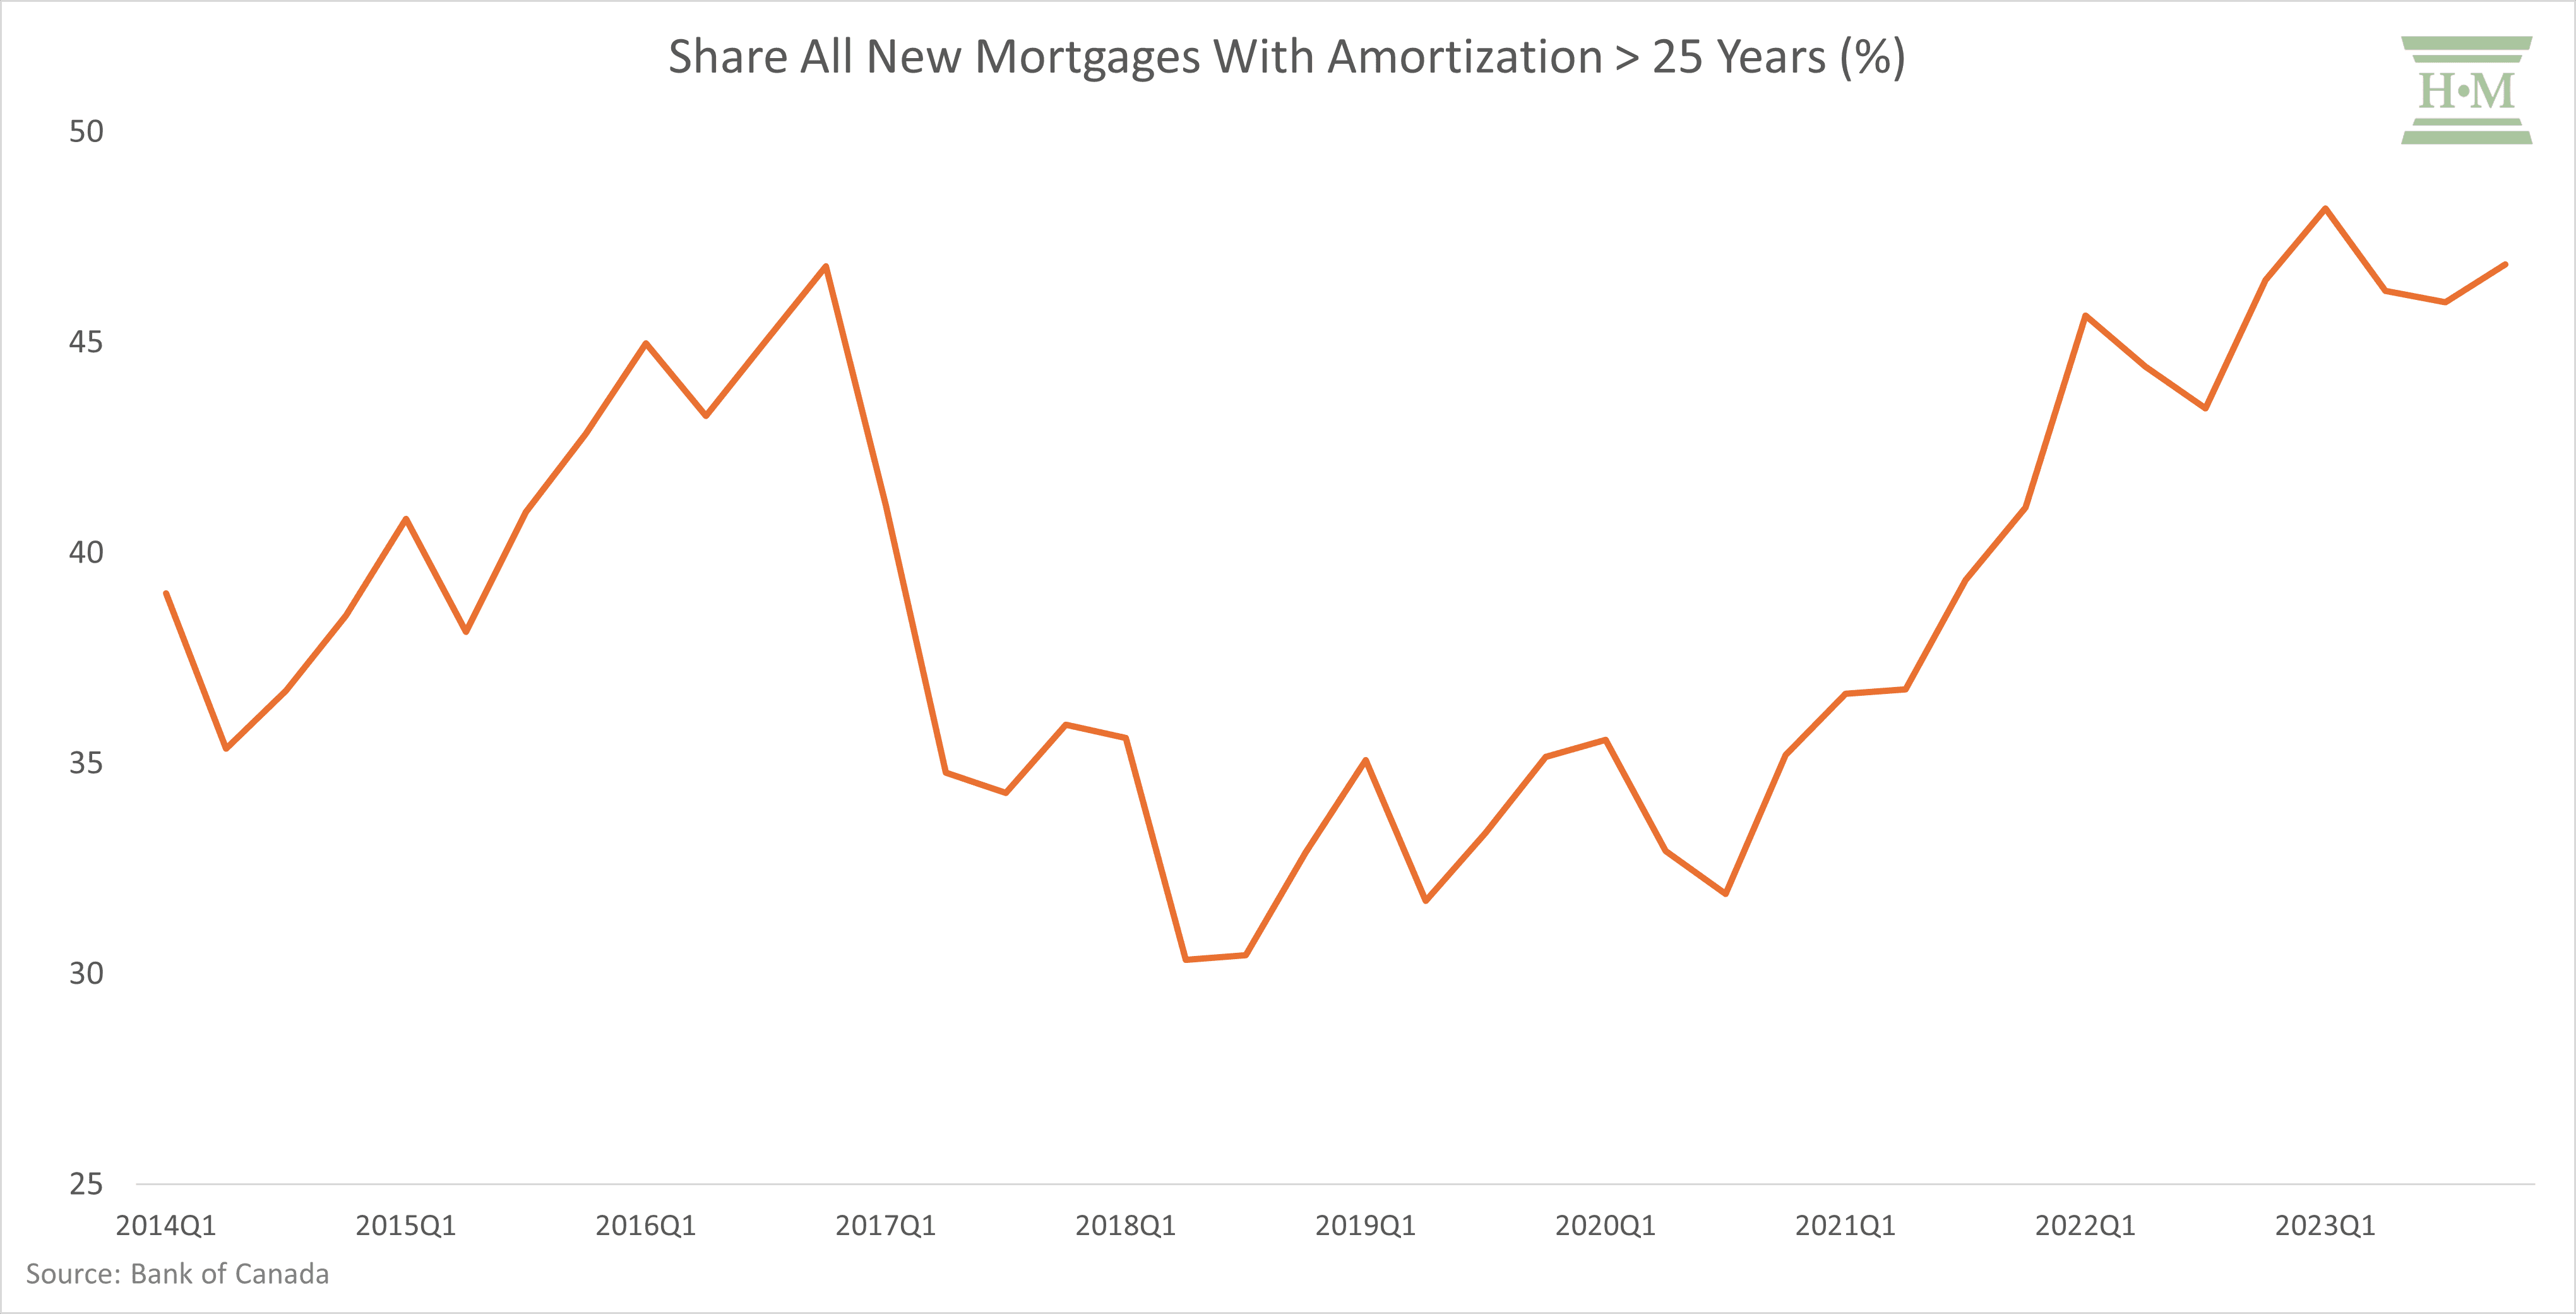 Share All New Mortgages with Amortization